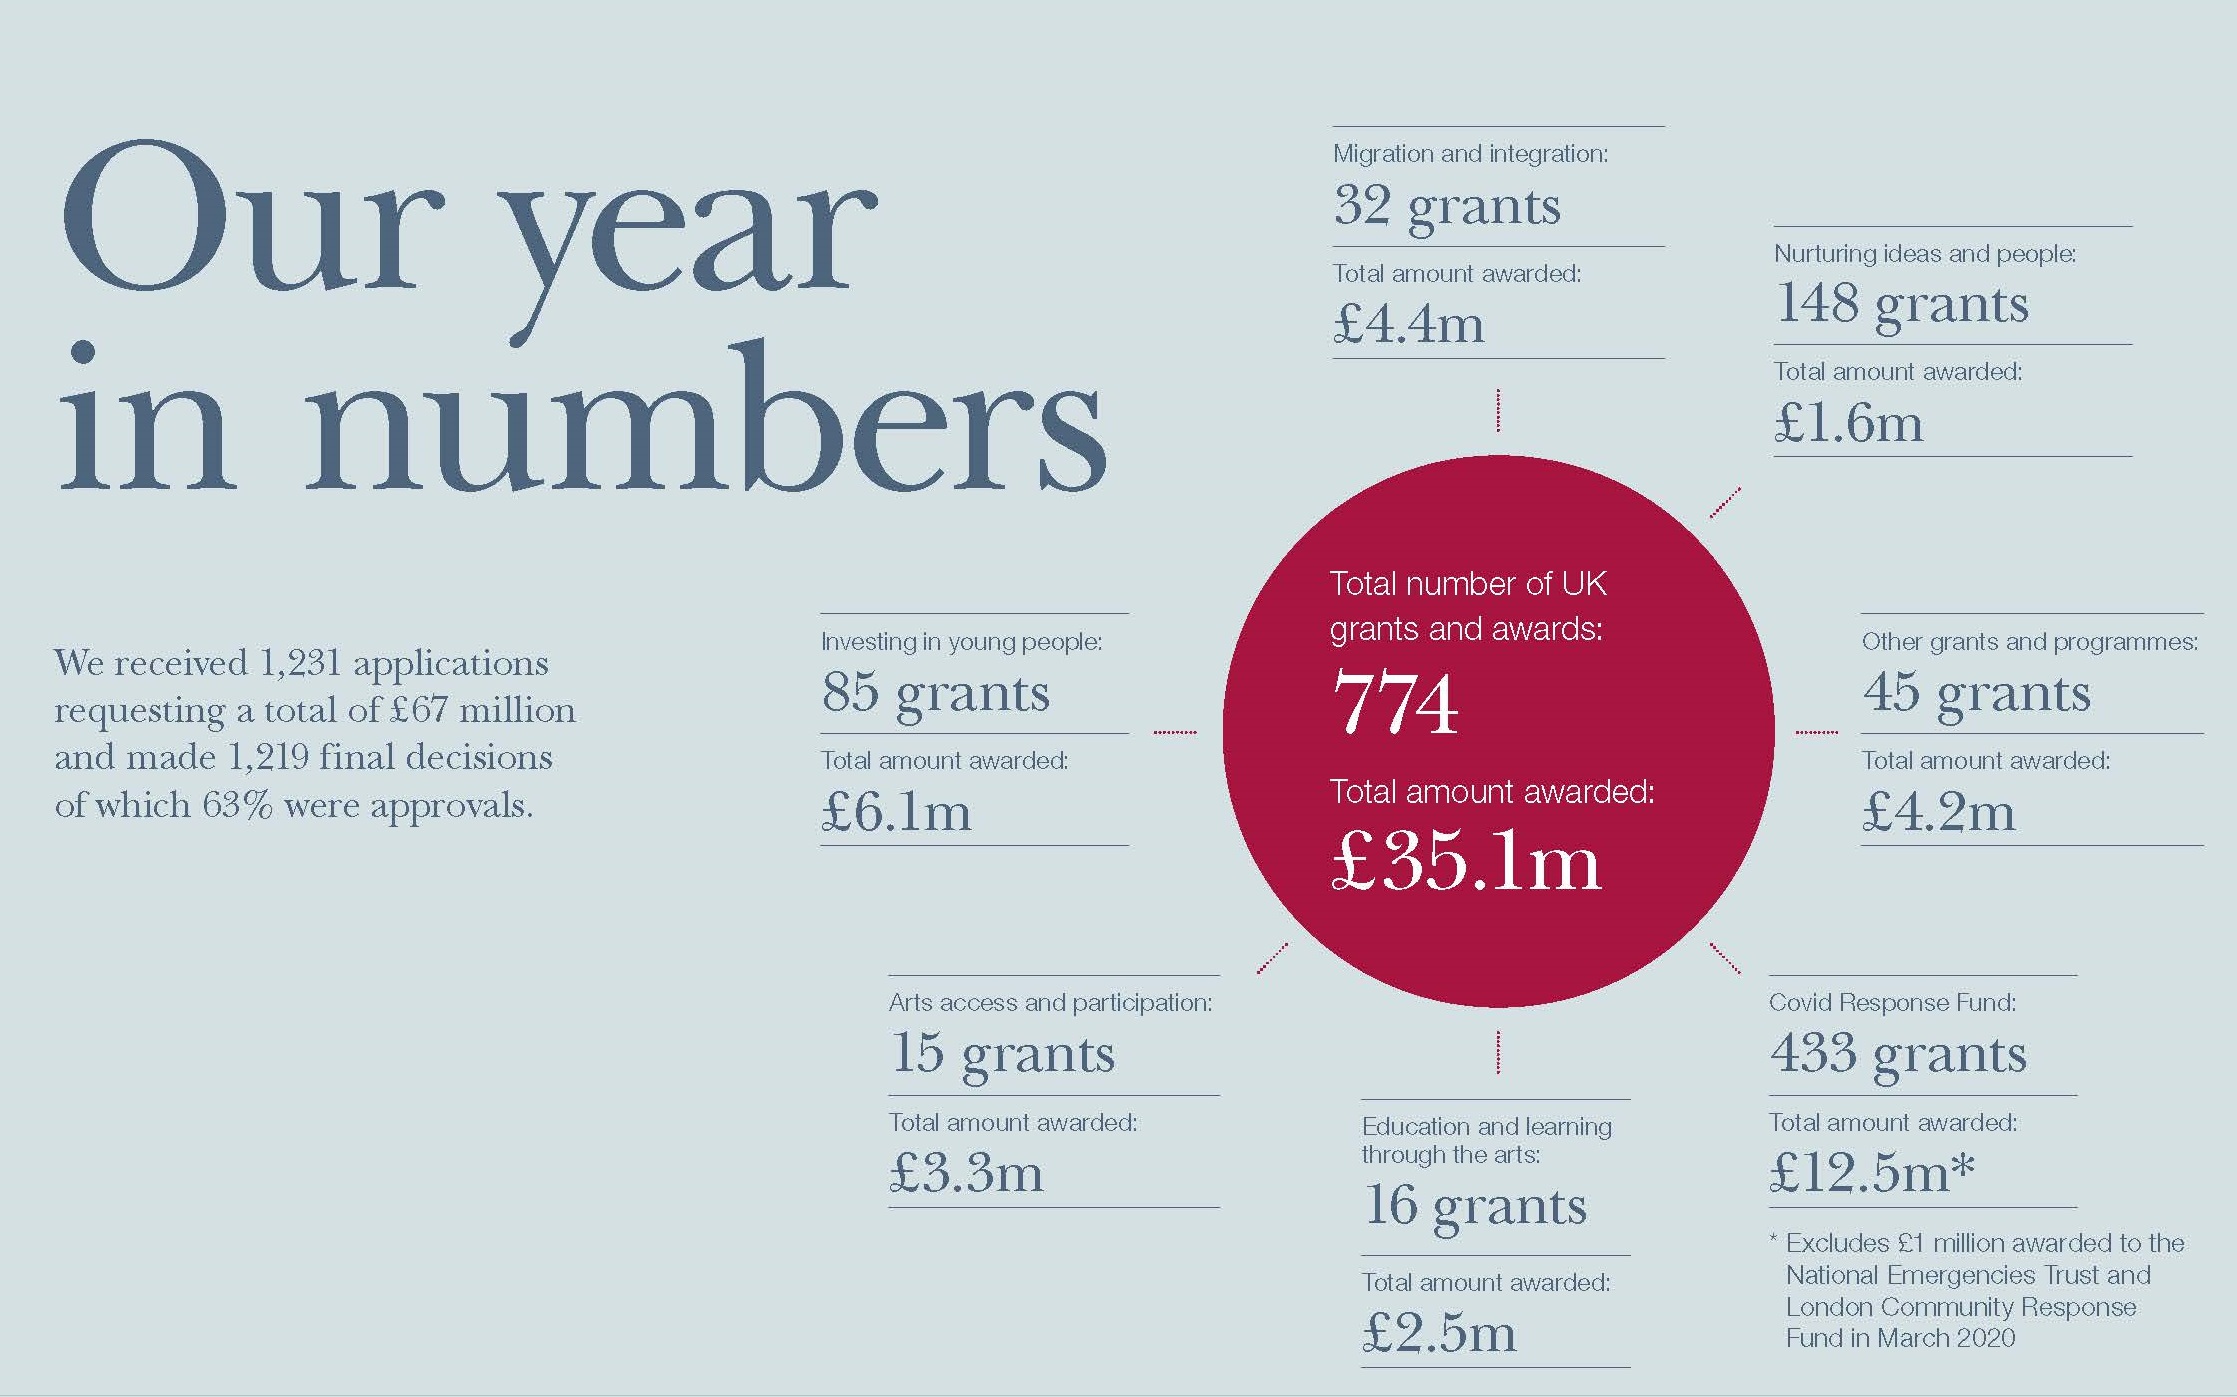 Image showing key figures from our Review of Grant-making